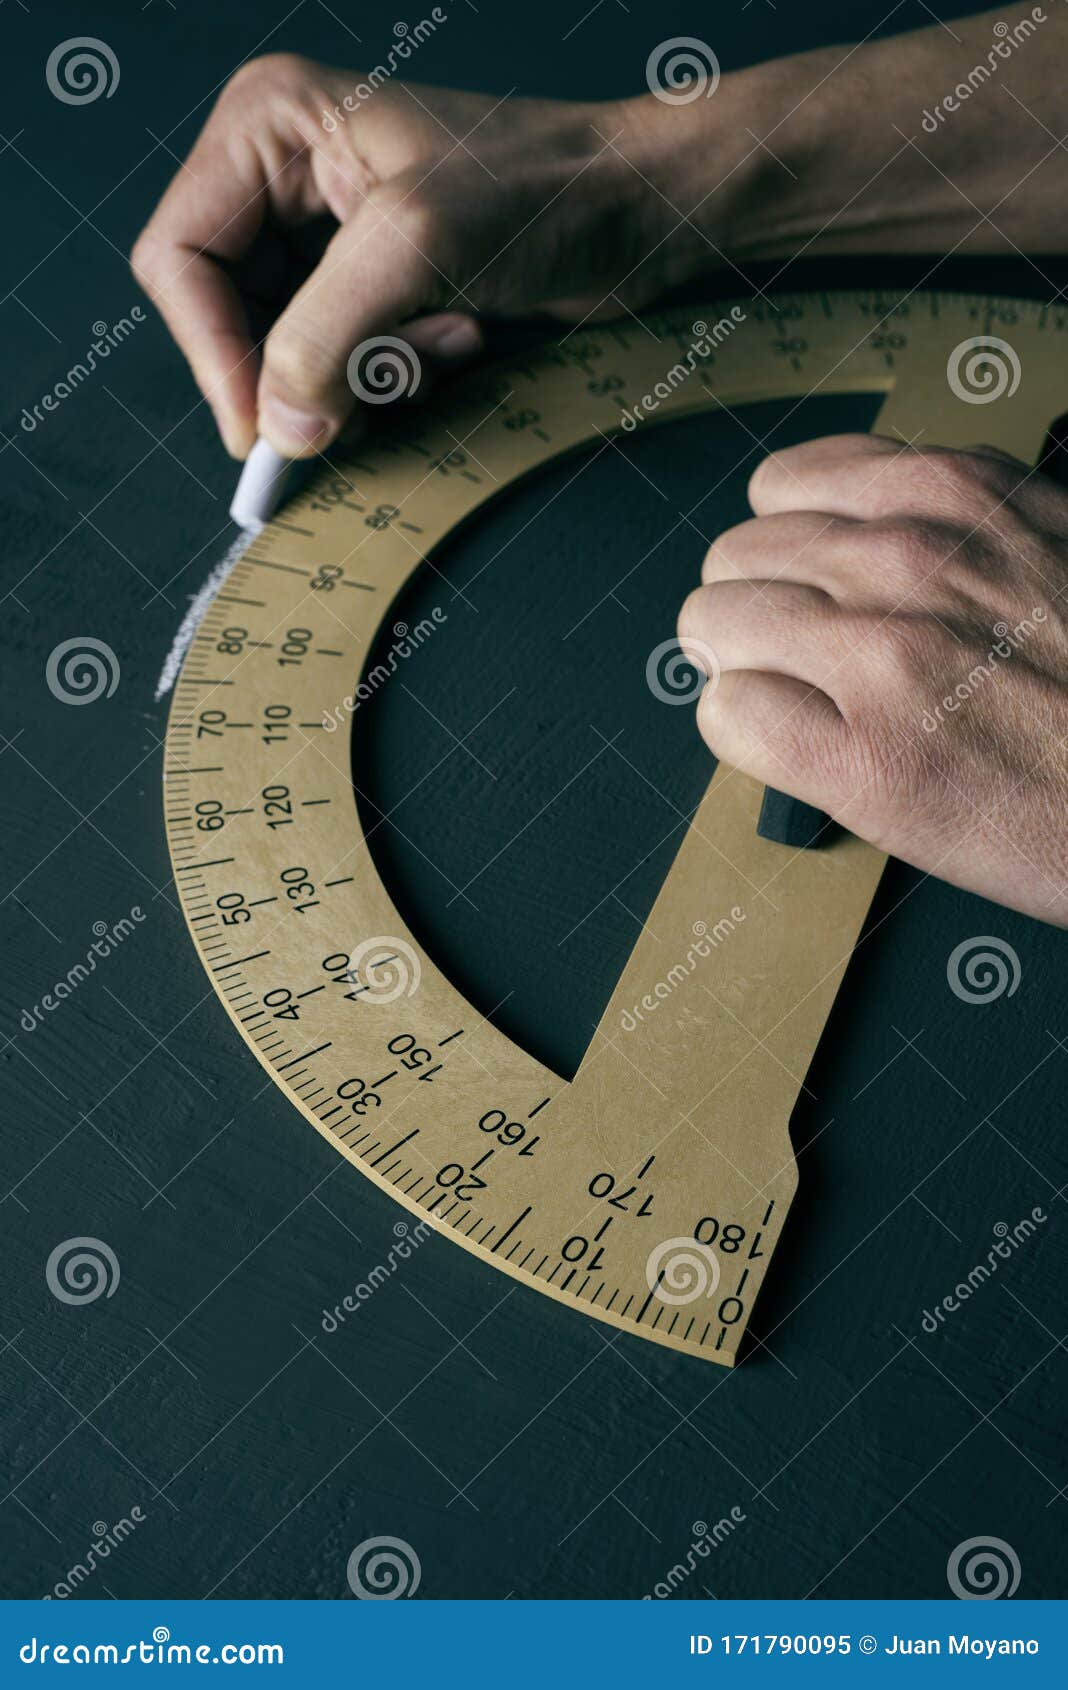 using a protractor